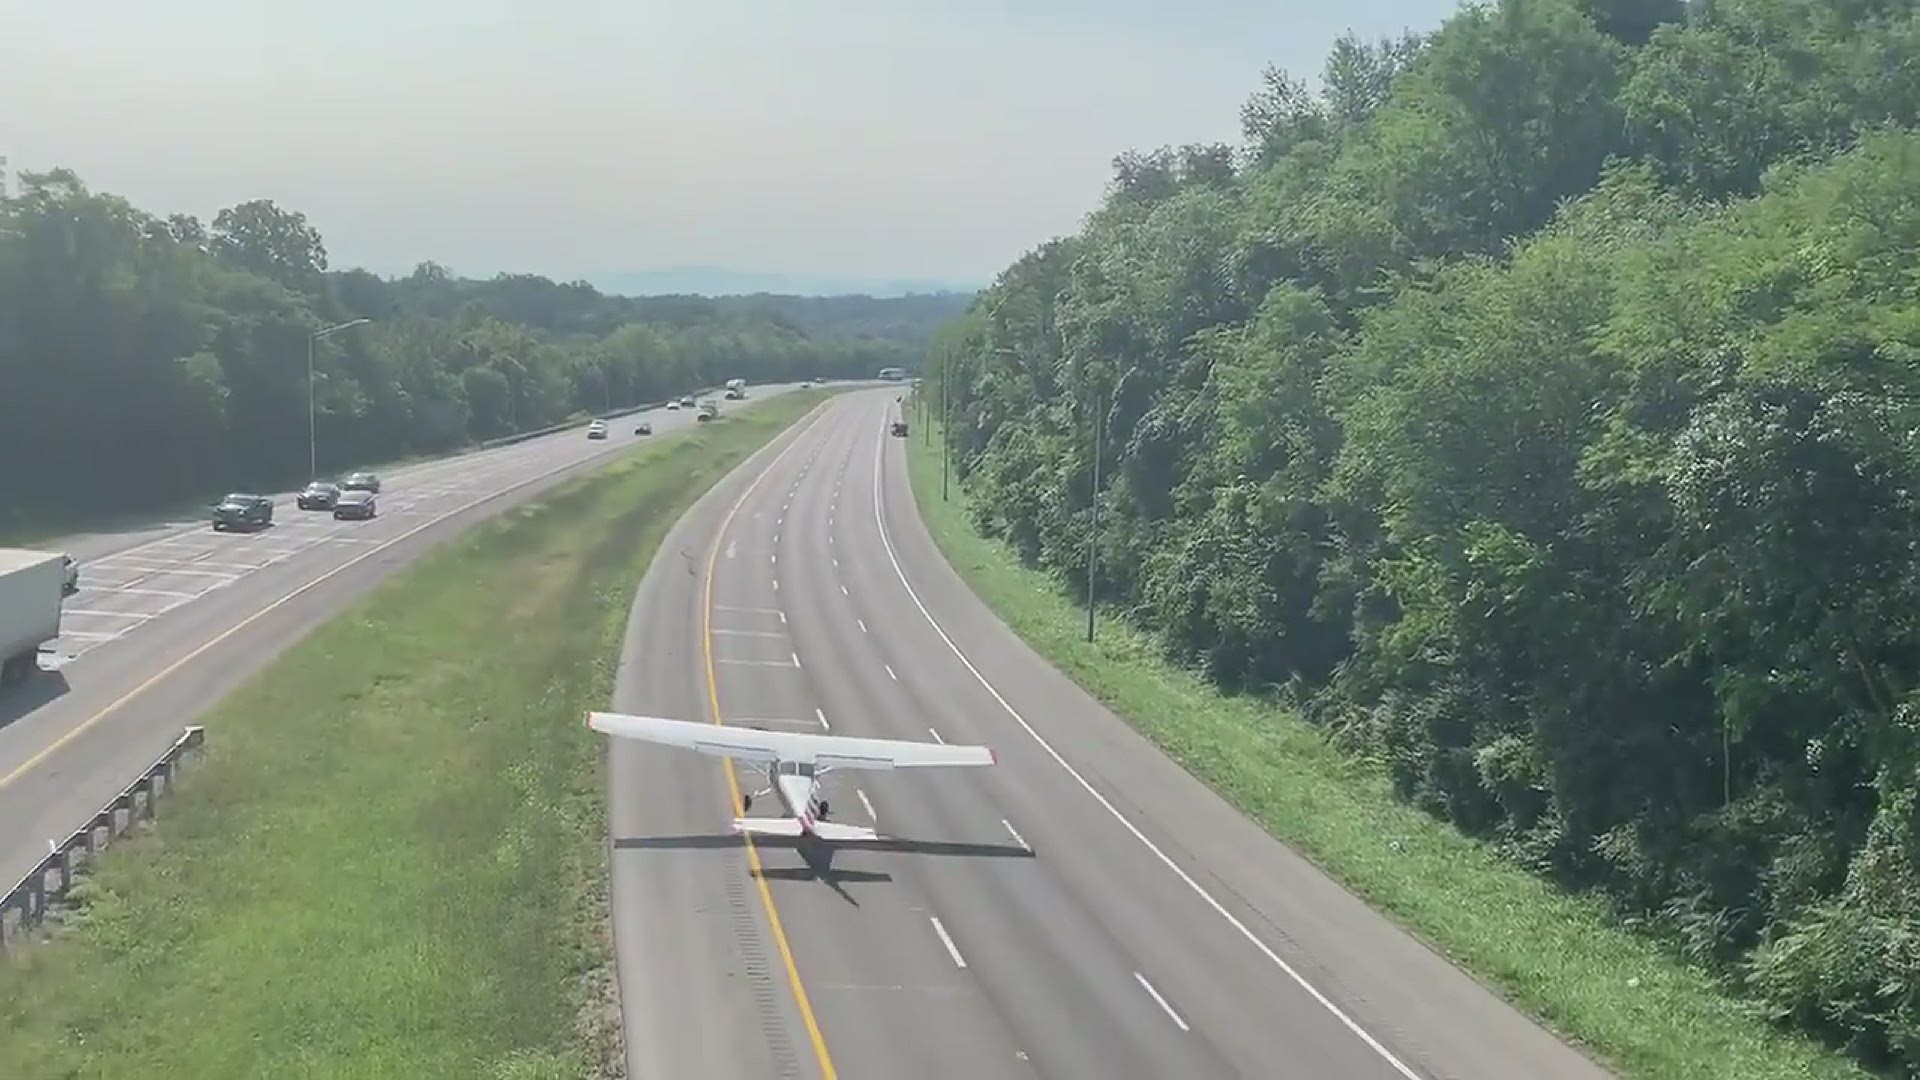 KPD shared this video of a small plane taking off after it made an emergency landing on I-640 in Knoxville.